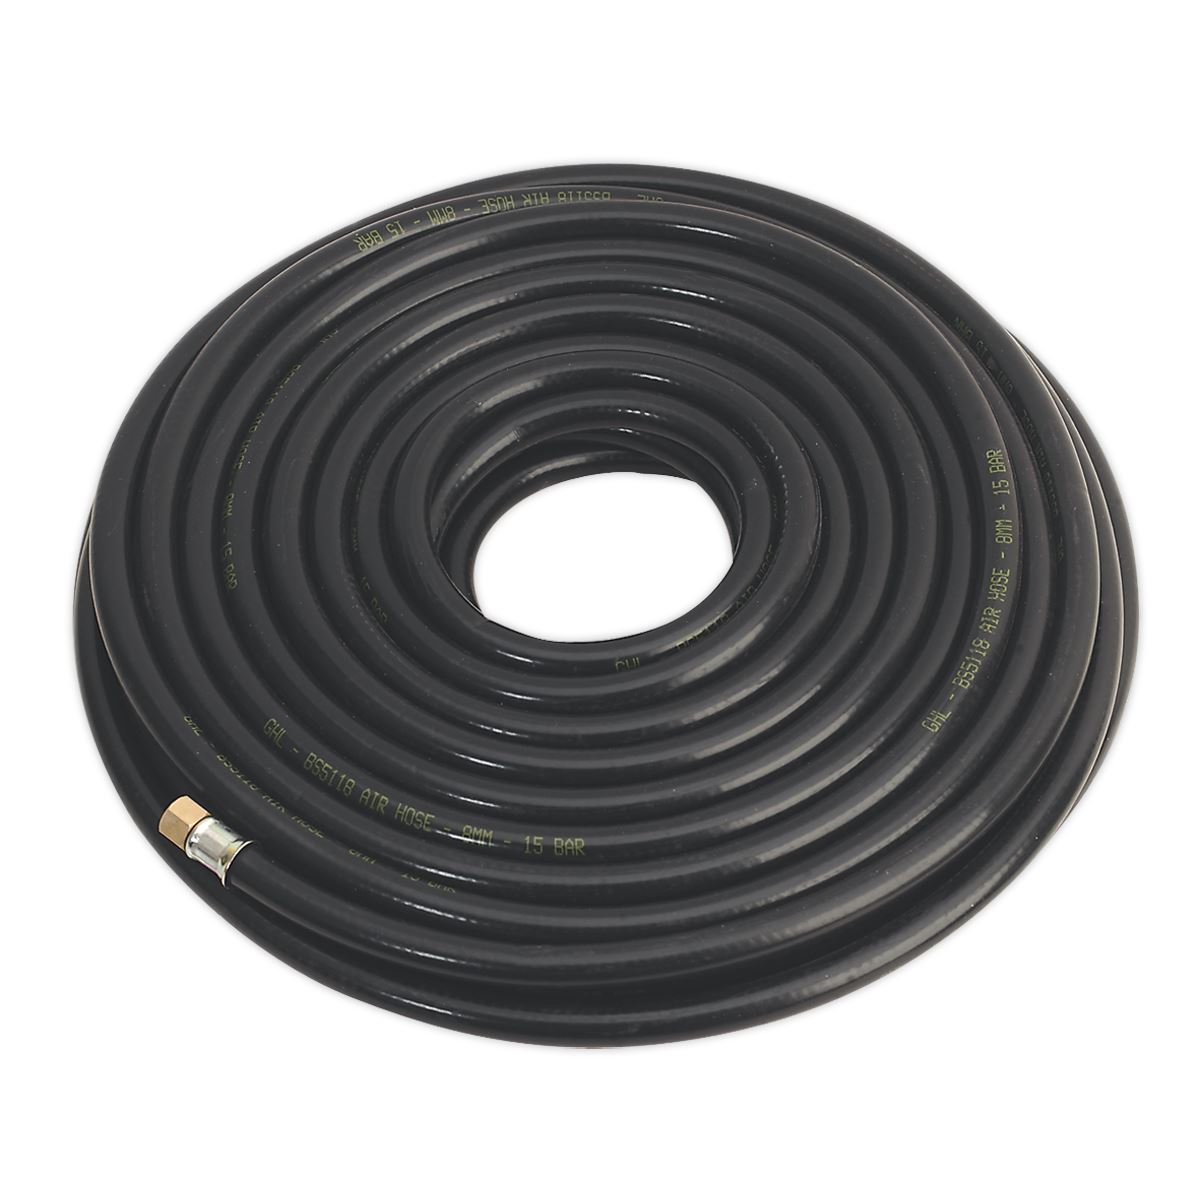 Sealey Air Hose 30m x Ø8mm with 1/4"BSP Unions Heavy-Duty